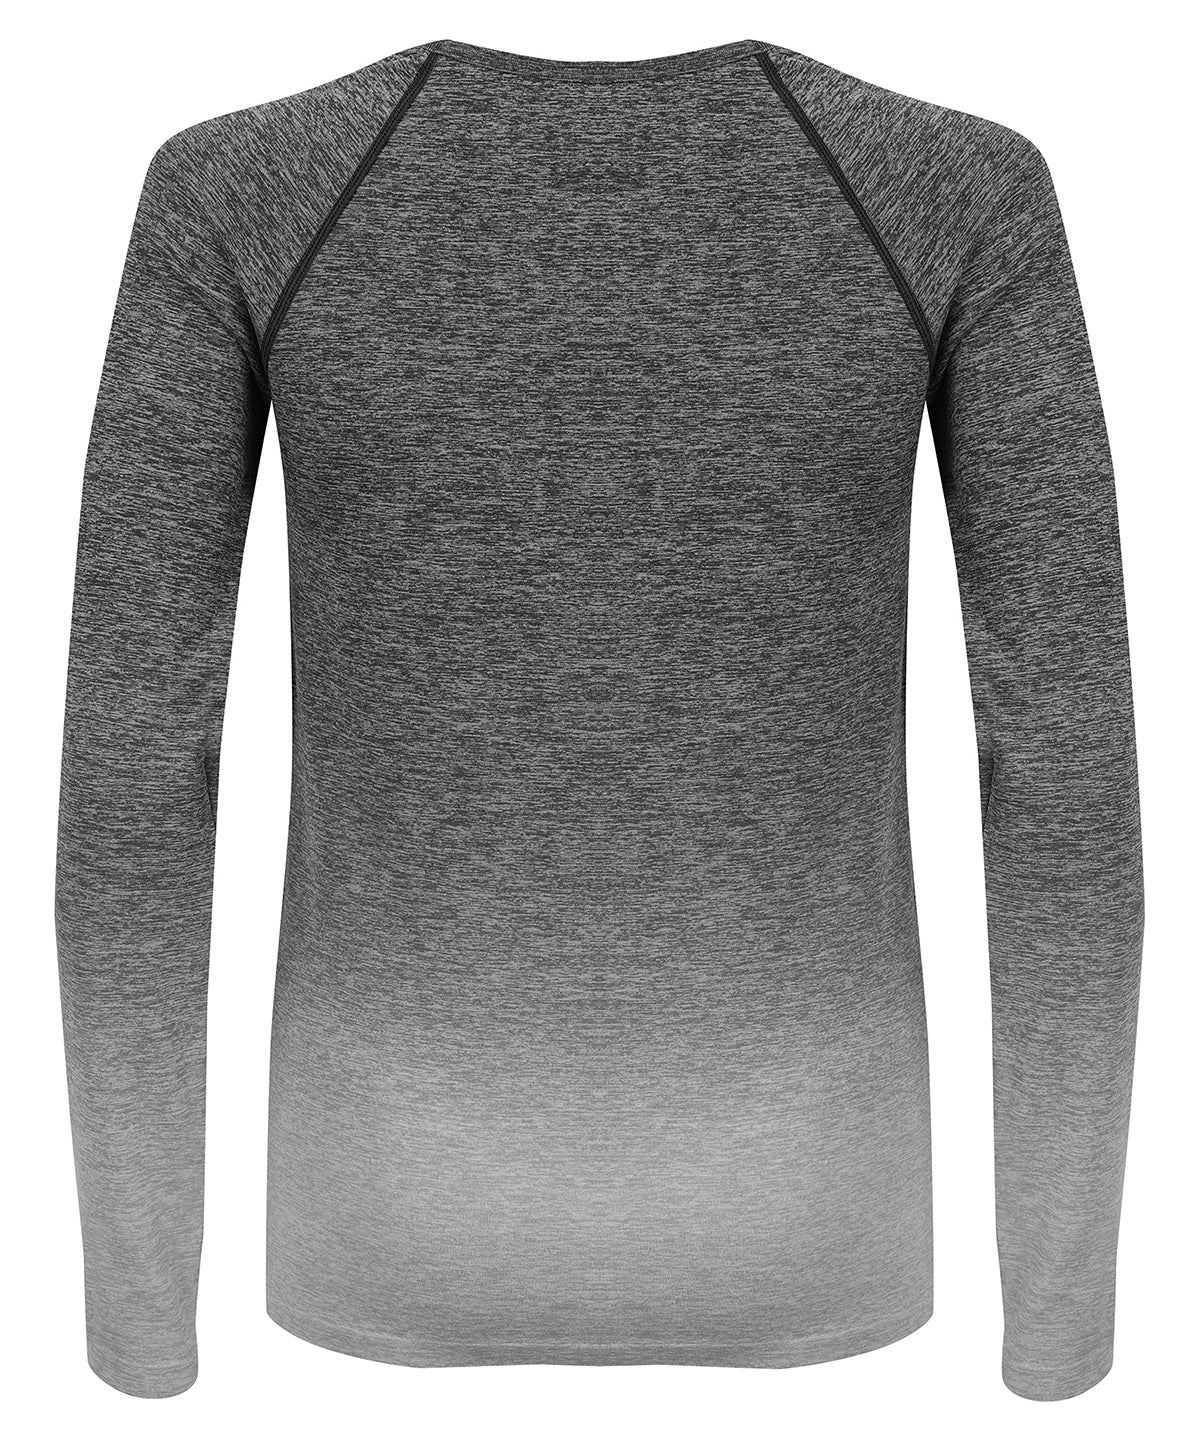 Women's Seamless Fade Out Top